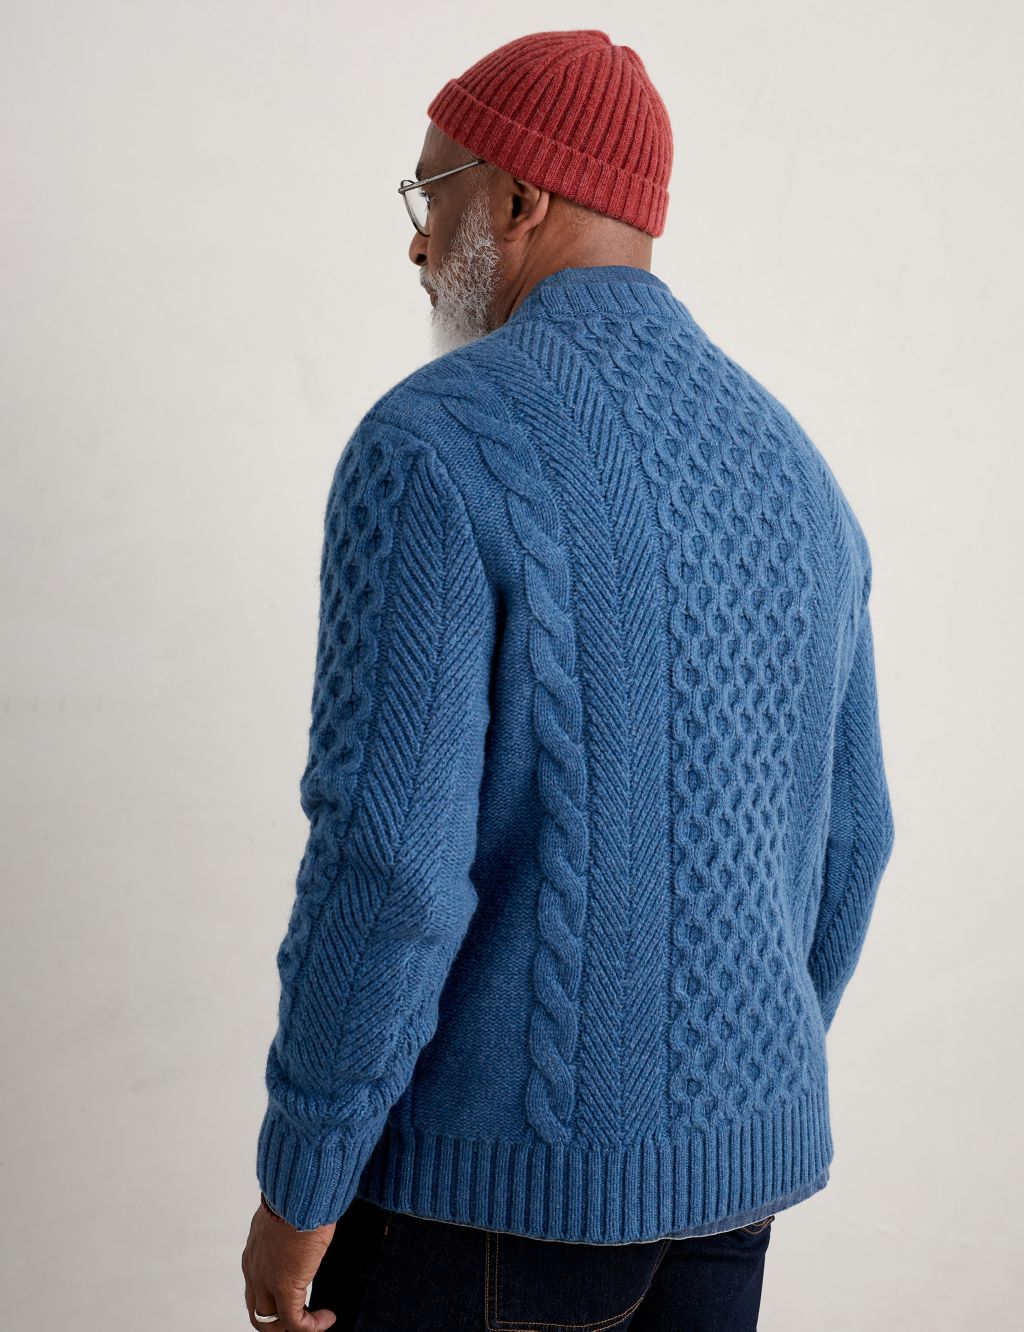 Lambswool Rich Cable Knit Crew Neck Jumper image 7